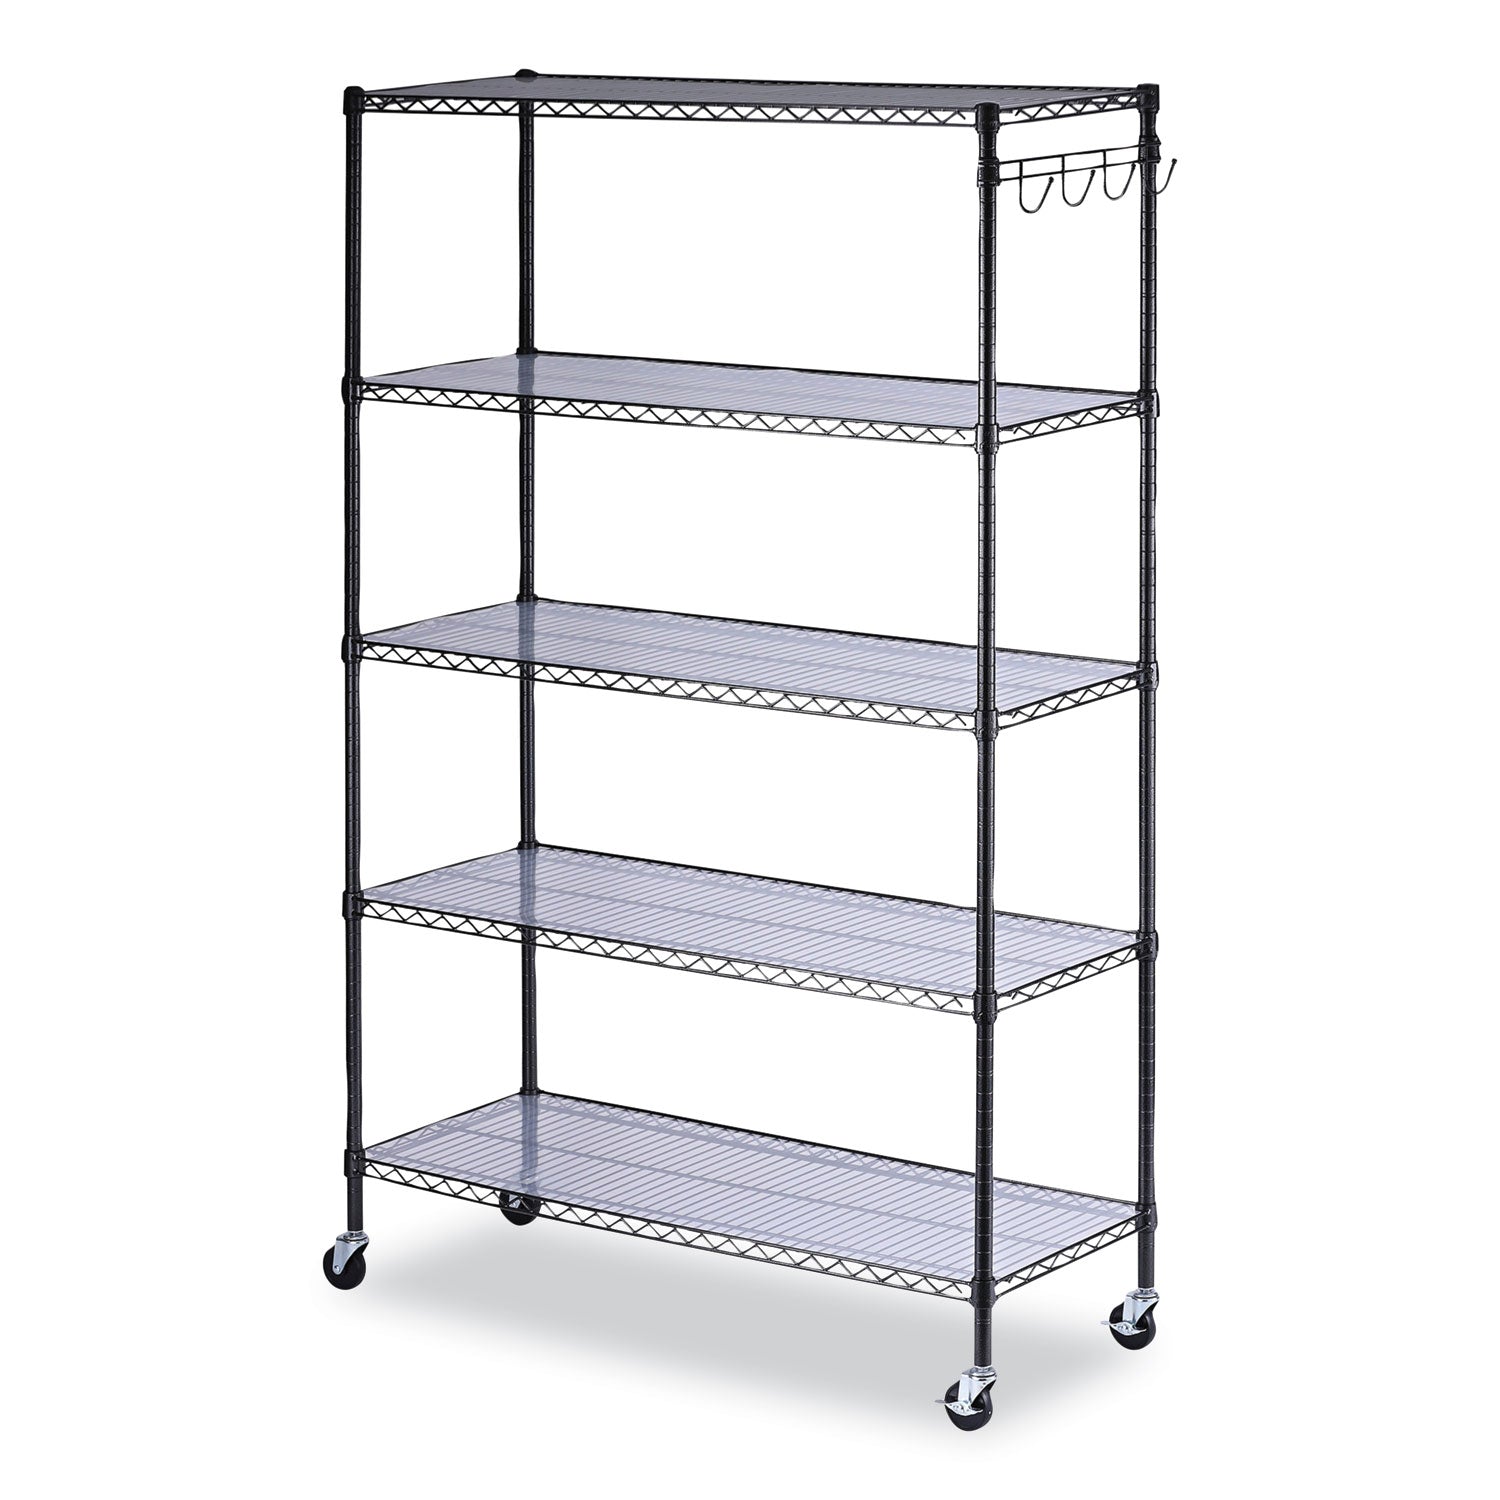 5-shelf-wire-shelving-kit-with-casters-and-shelf-liners-48w-x-18d-x-72h-black-anthracite_alesw654818ba - 1